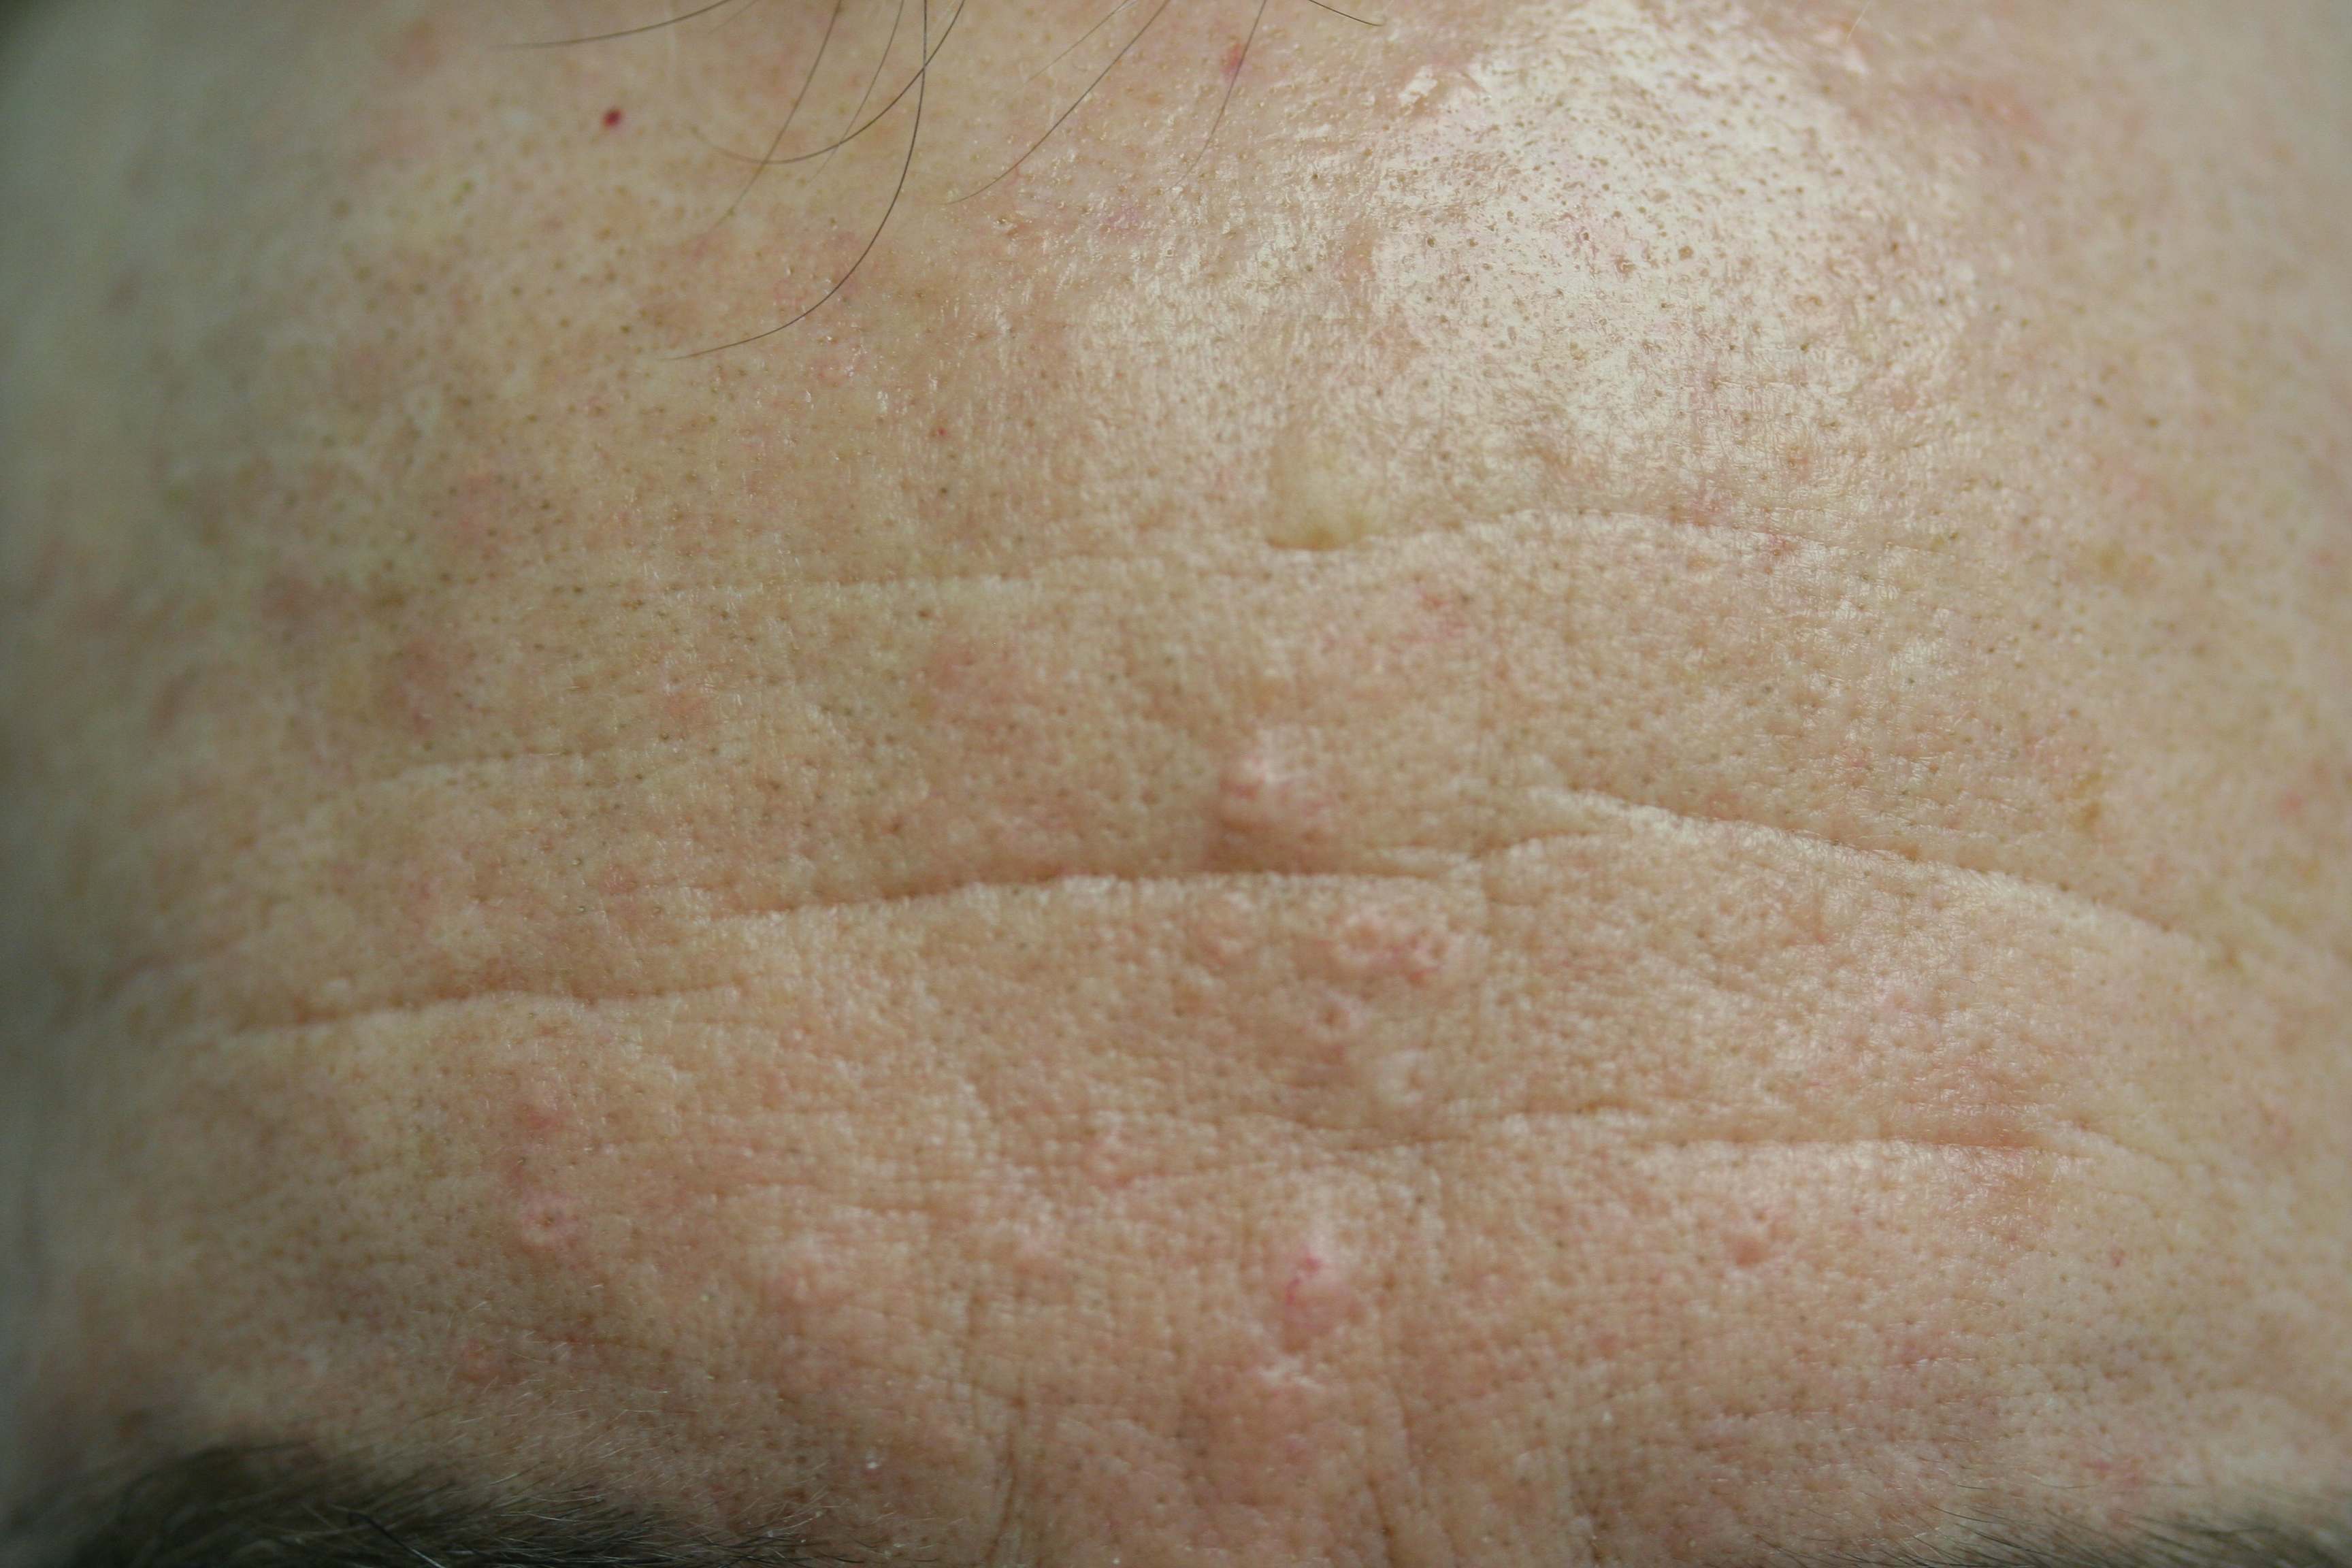 Multiple sebaceous hyperplasias on forehead.  These regressed with oral isotretinoin treatment.